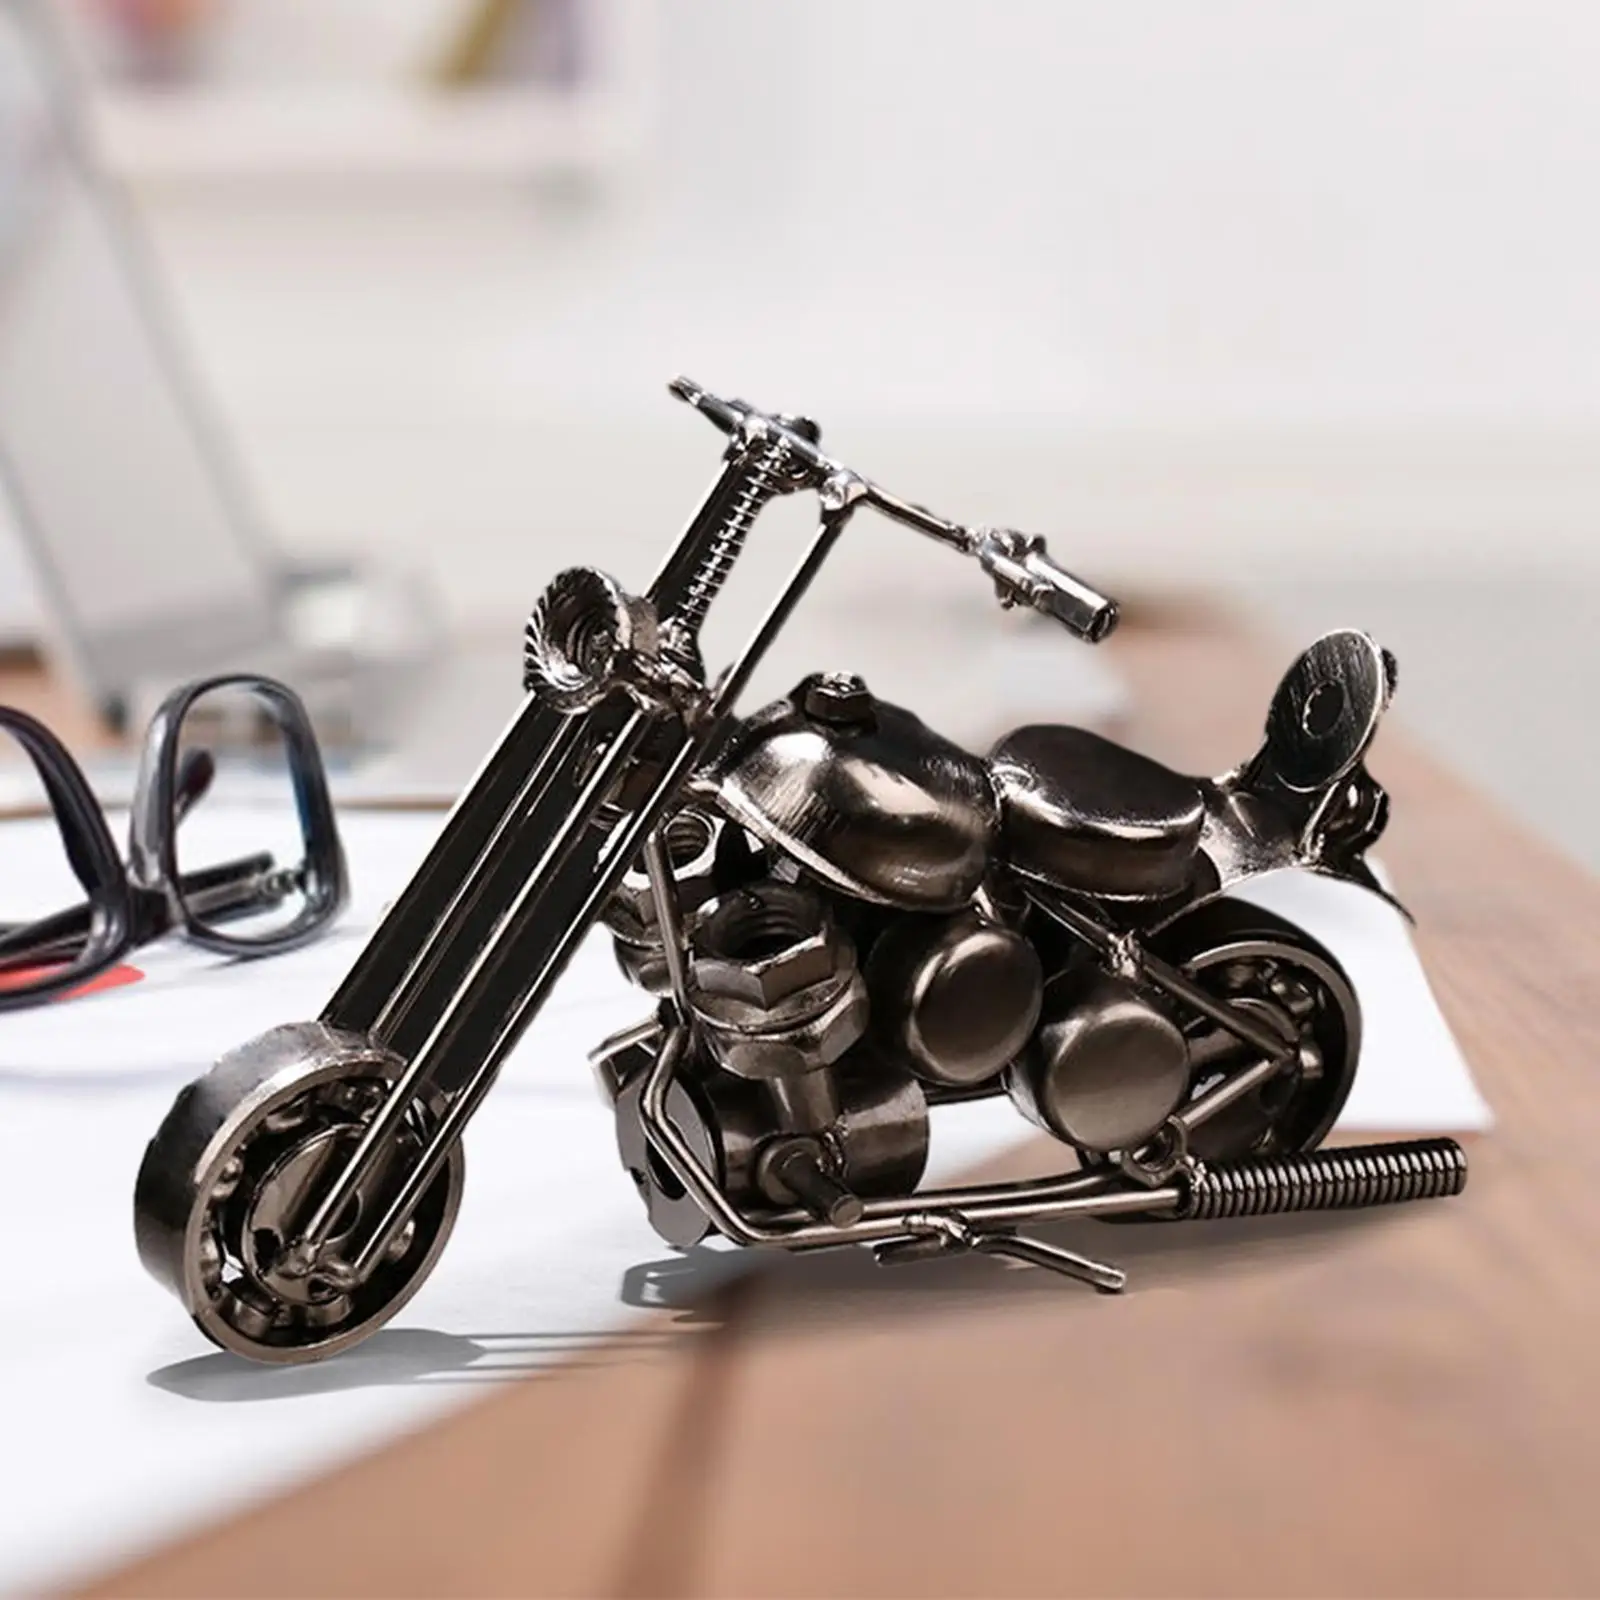 Motorcycle Model Motorcycle Sculpture Birthday Gift Figure Artwork Accessories Motorcycle Figurine for Desk Home Office Son Boys